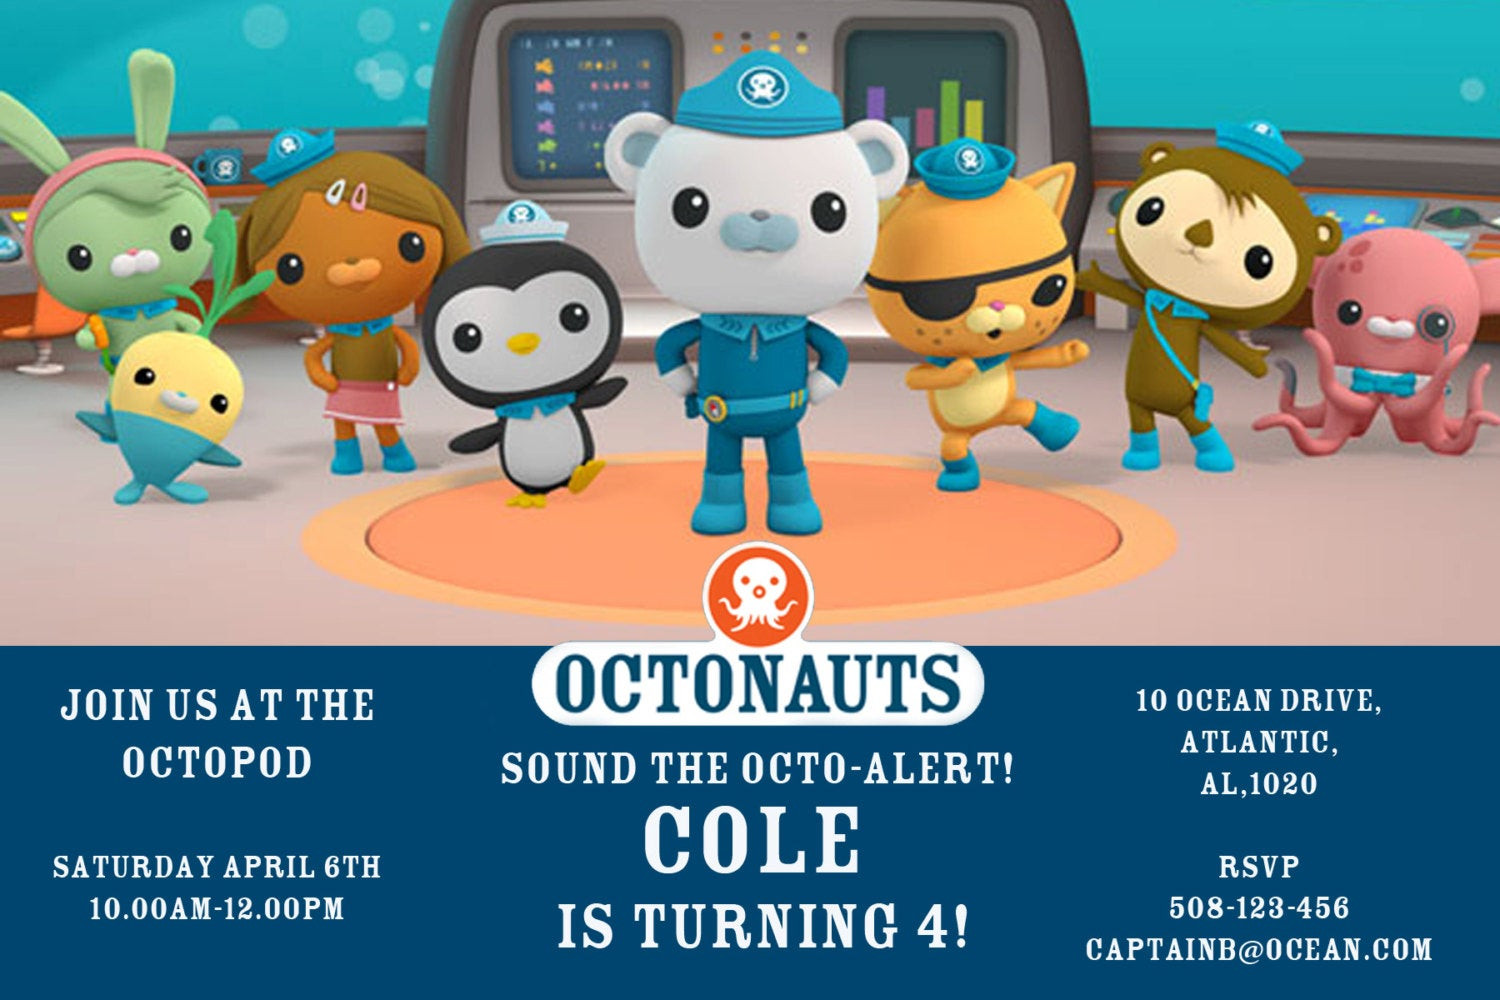 25 Of the Best Ideas for Octonauts Birthday Invitations – Home, Family ...